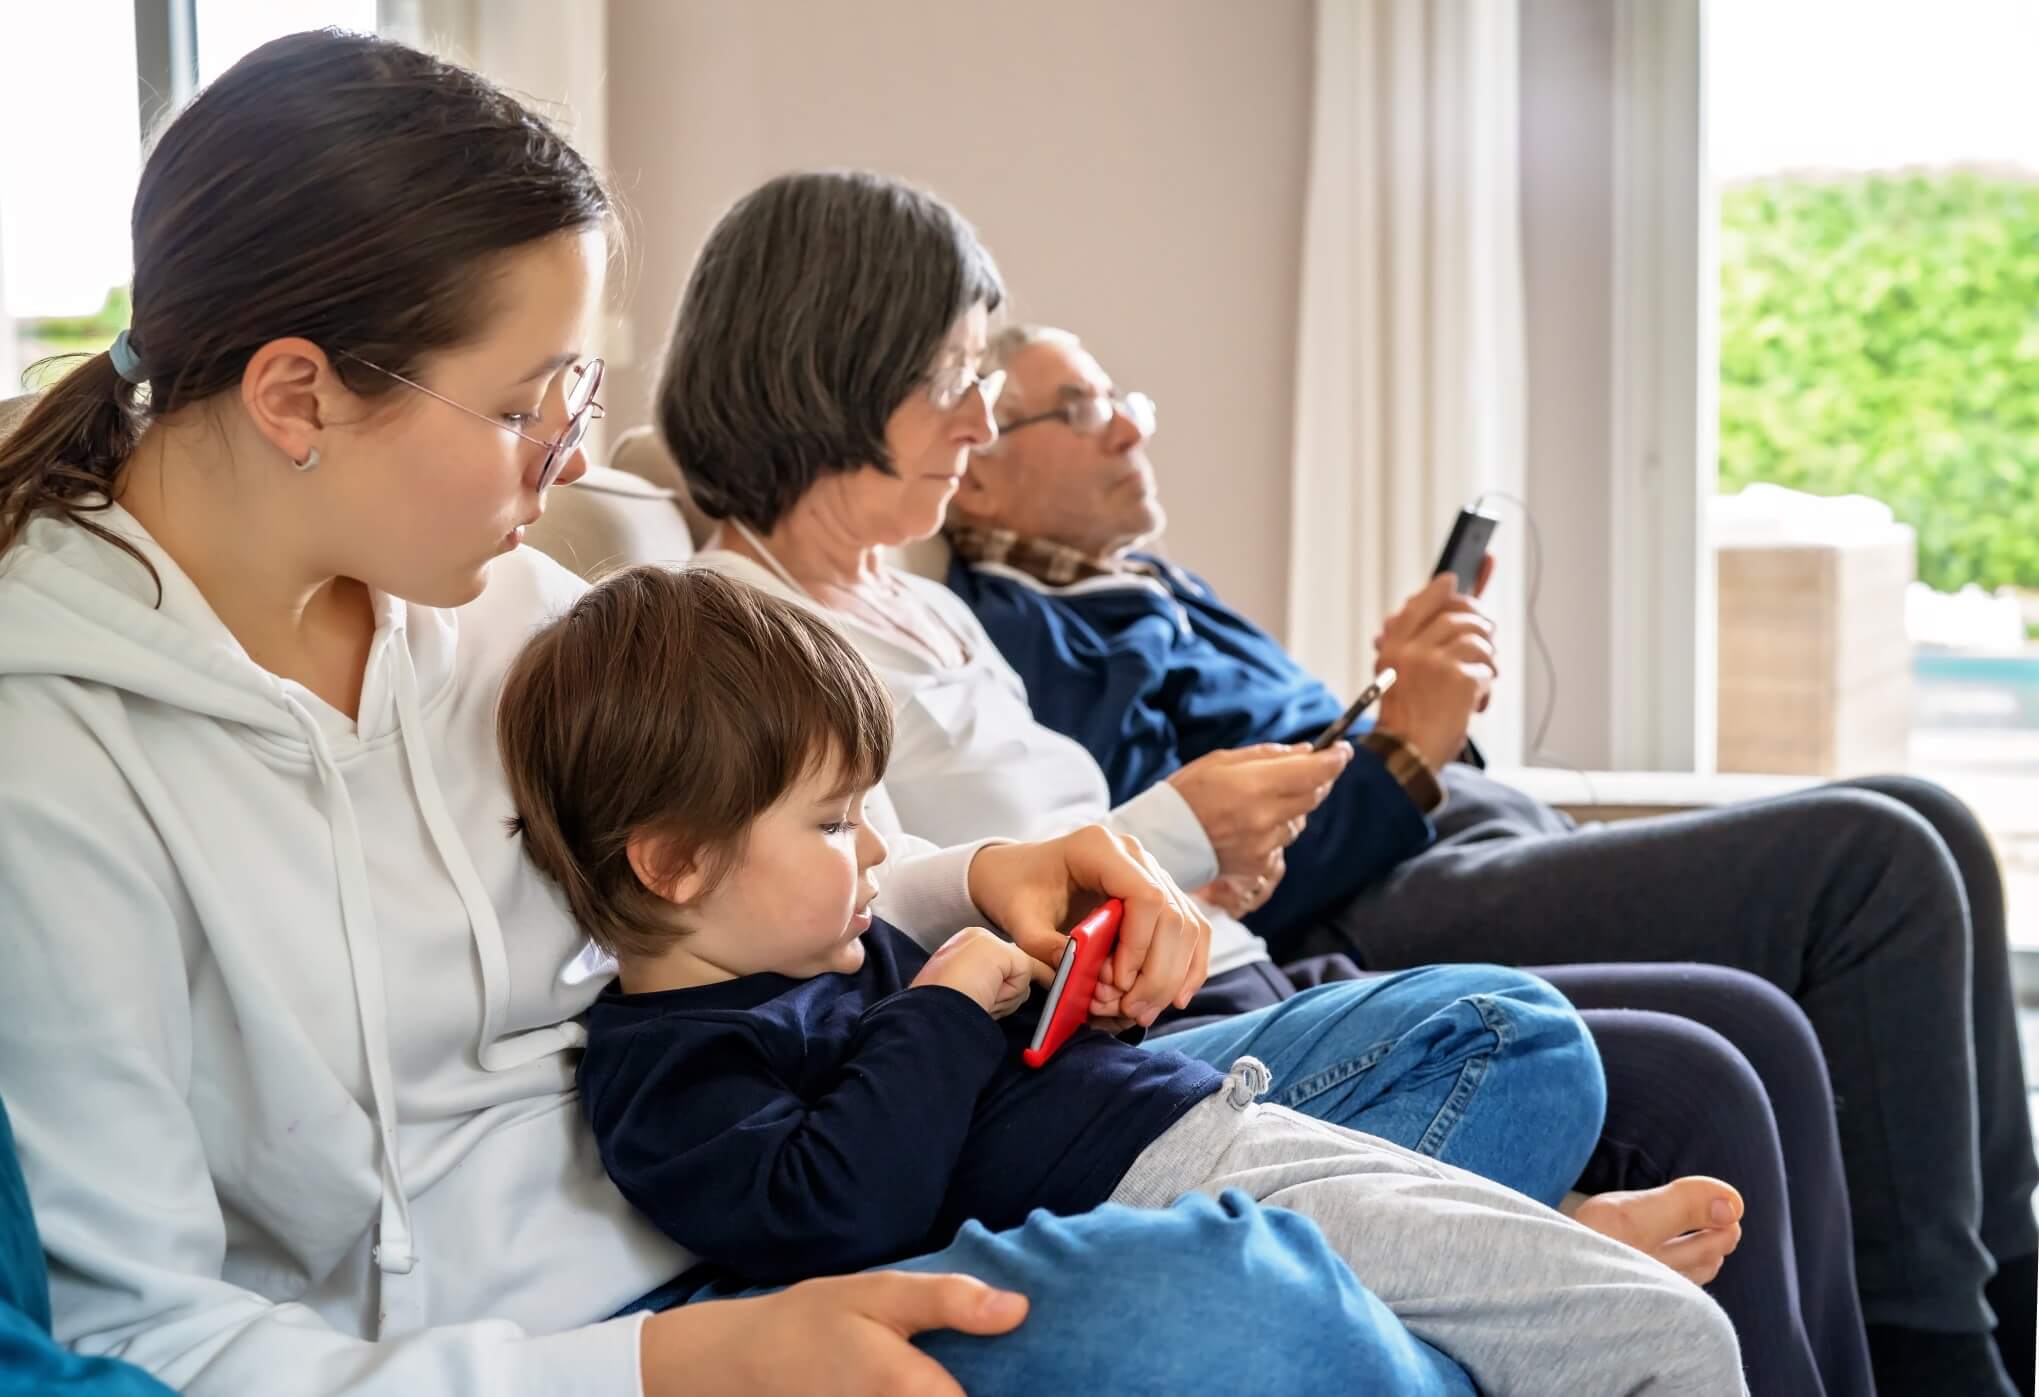 modern-family-lifestyle-senior-white-hair-grandparents-and-grandchildren-sitting-on-couch-with_t20_9k0rbO (1)